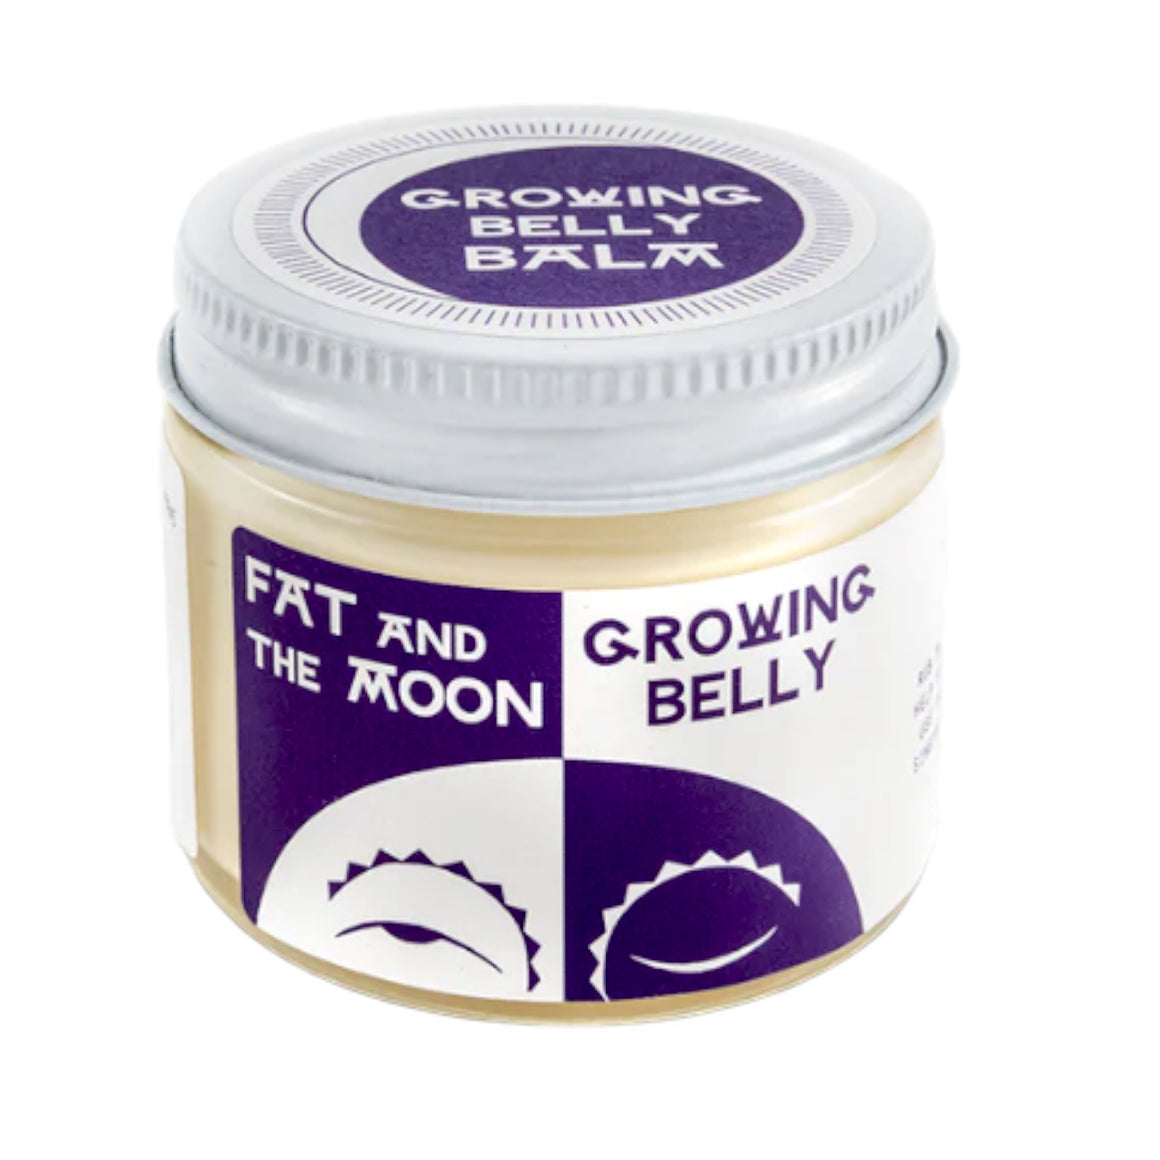 Growing Belly Balm 2oz/60ml - Fat & The Moon